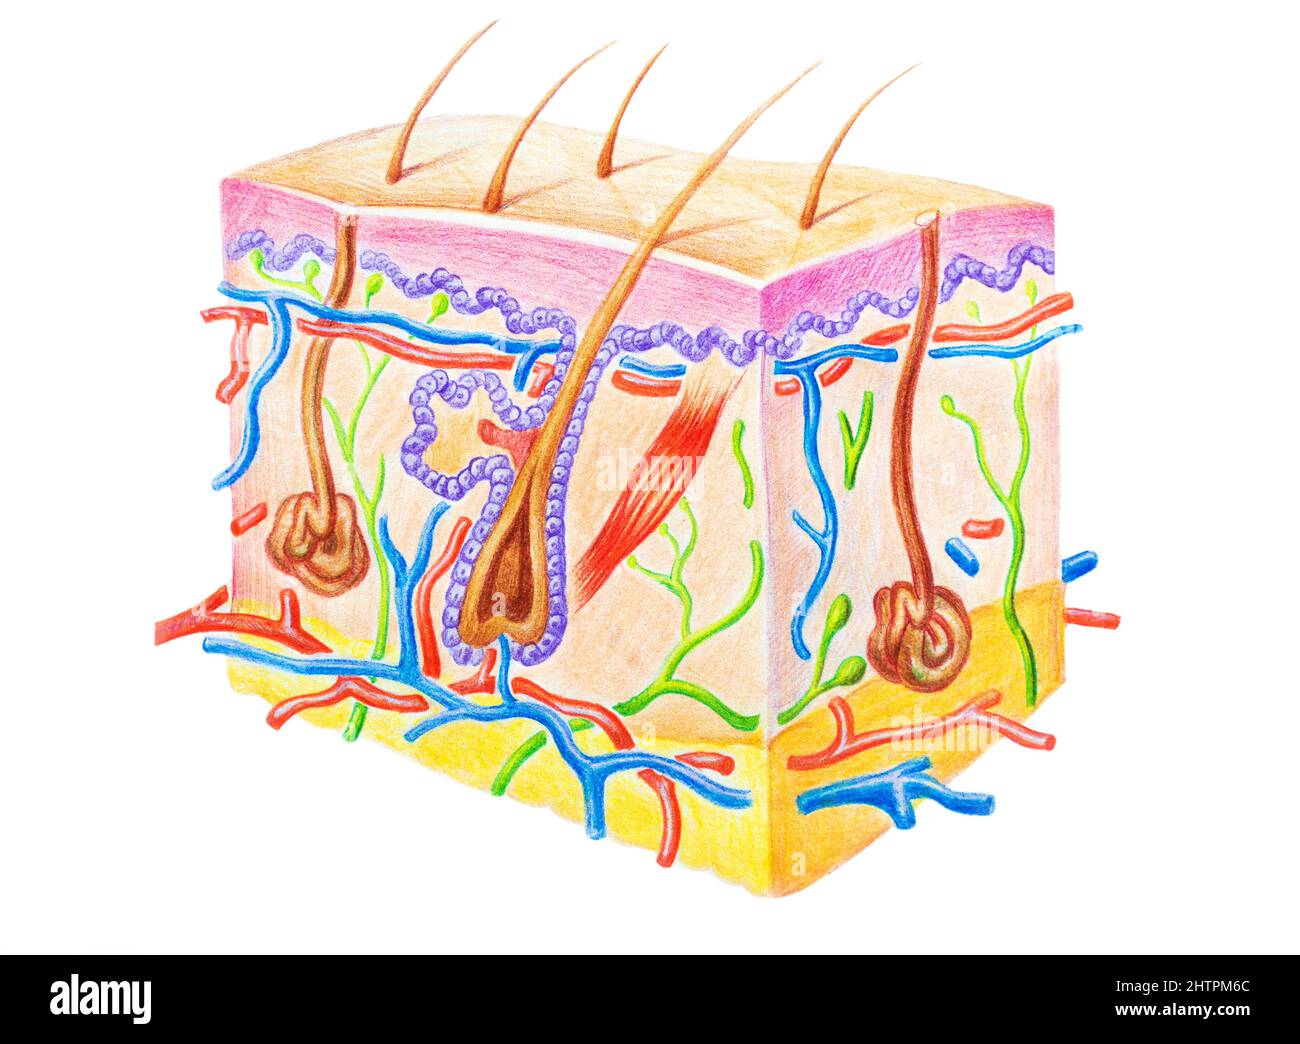 Human skin structure showing skin layers, hair and sweat gland. Handdrawn illustration with colored pencils Stock Photo